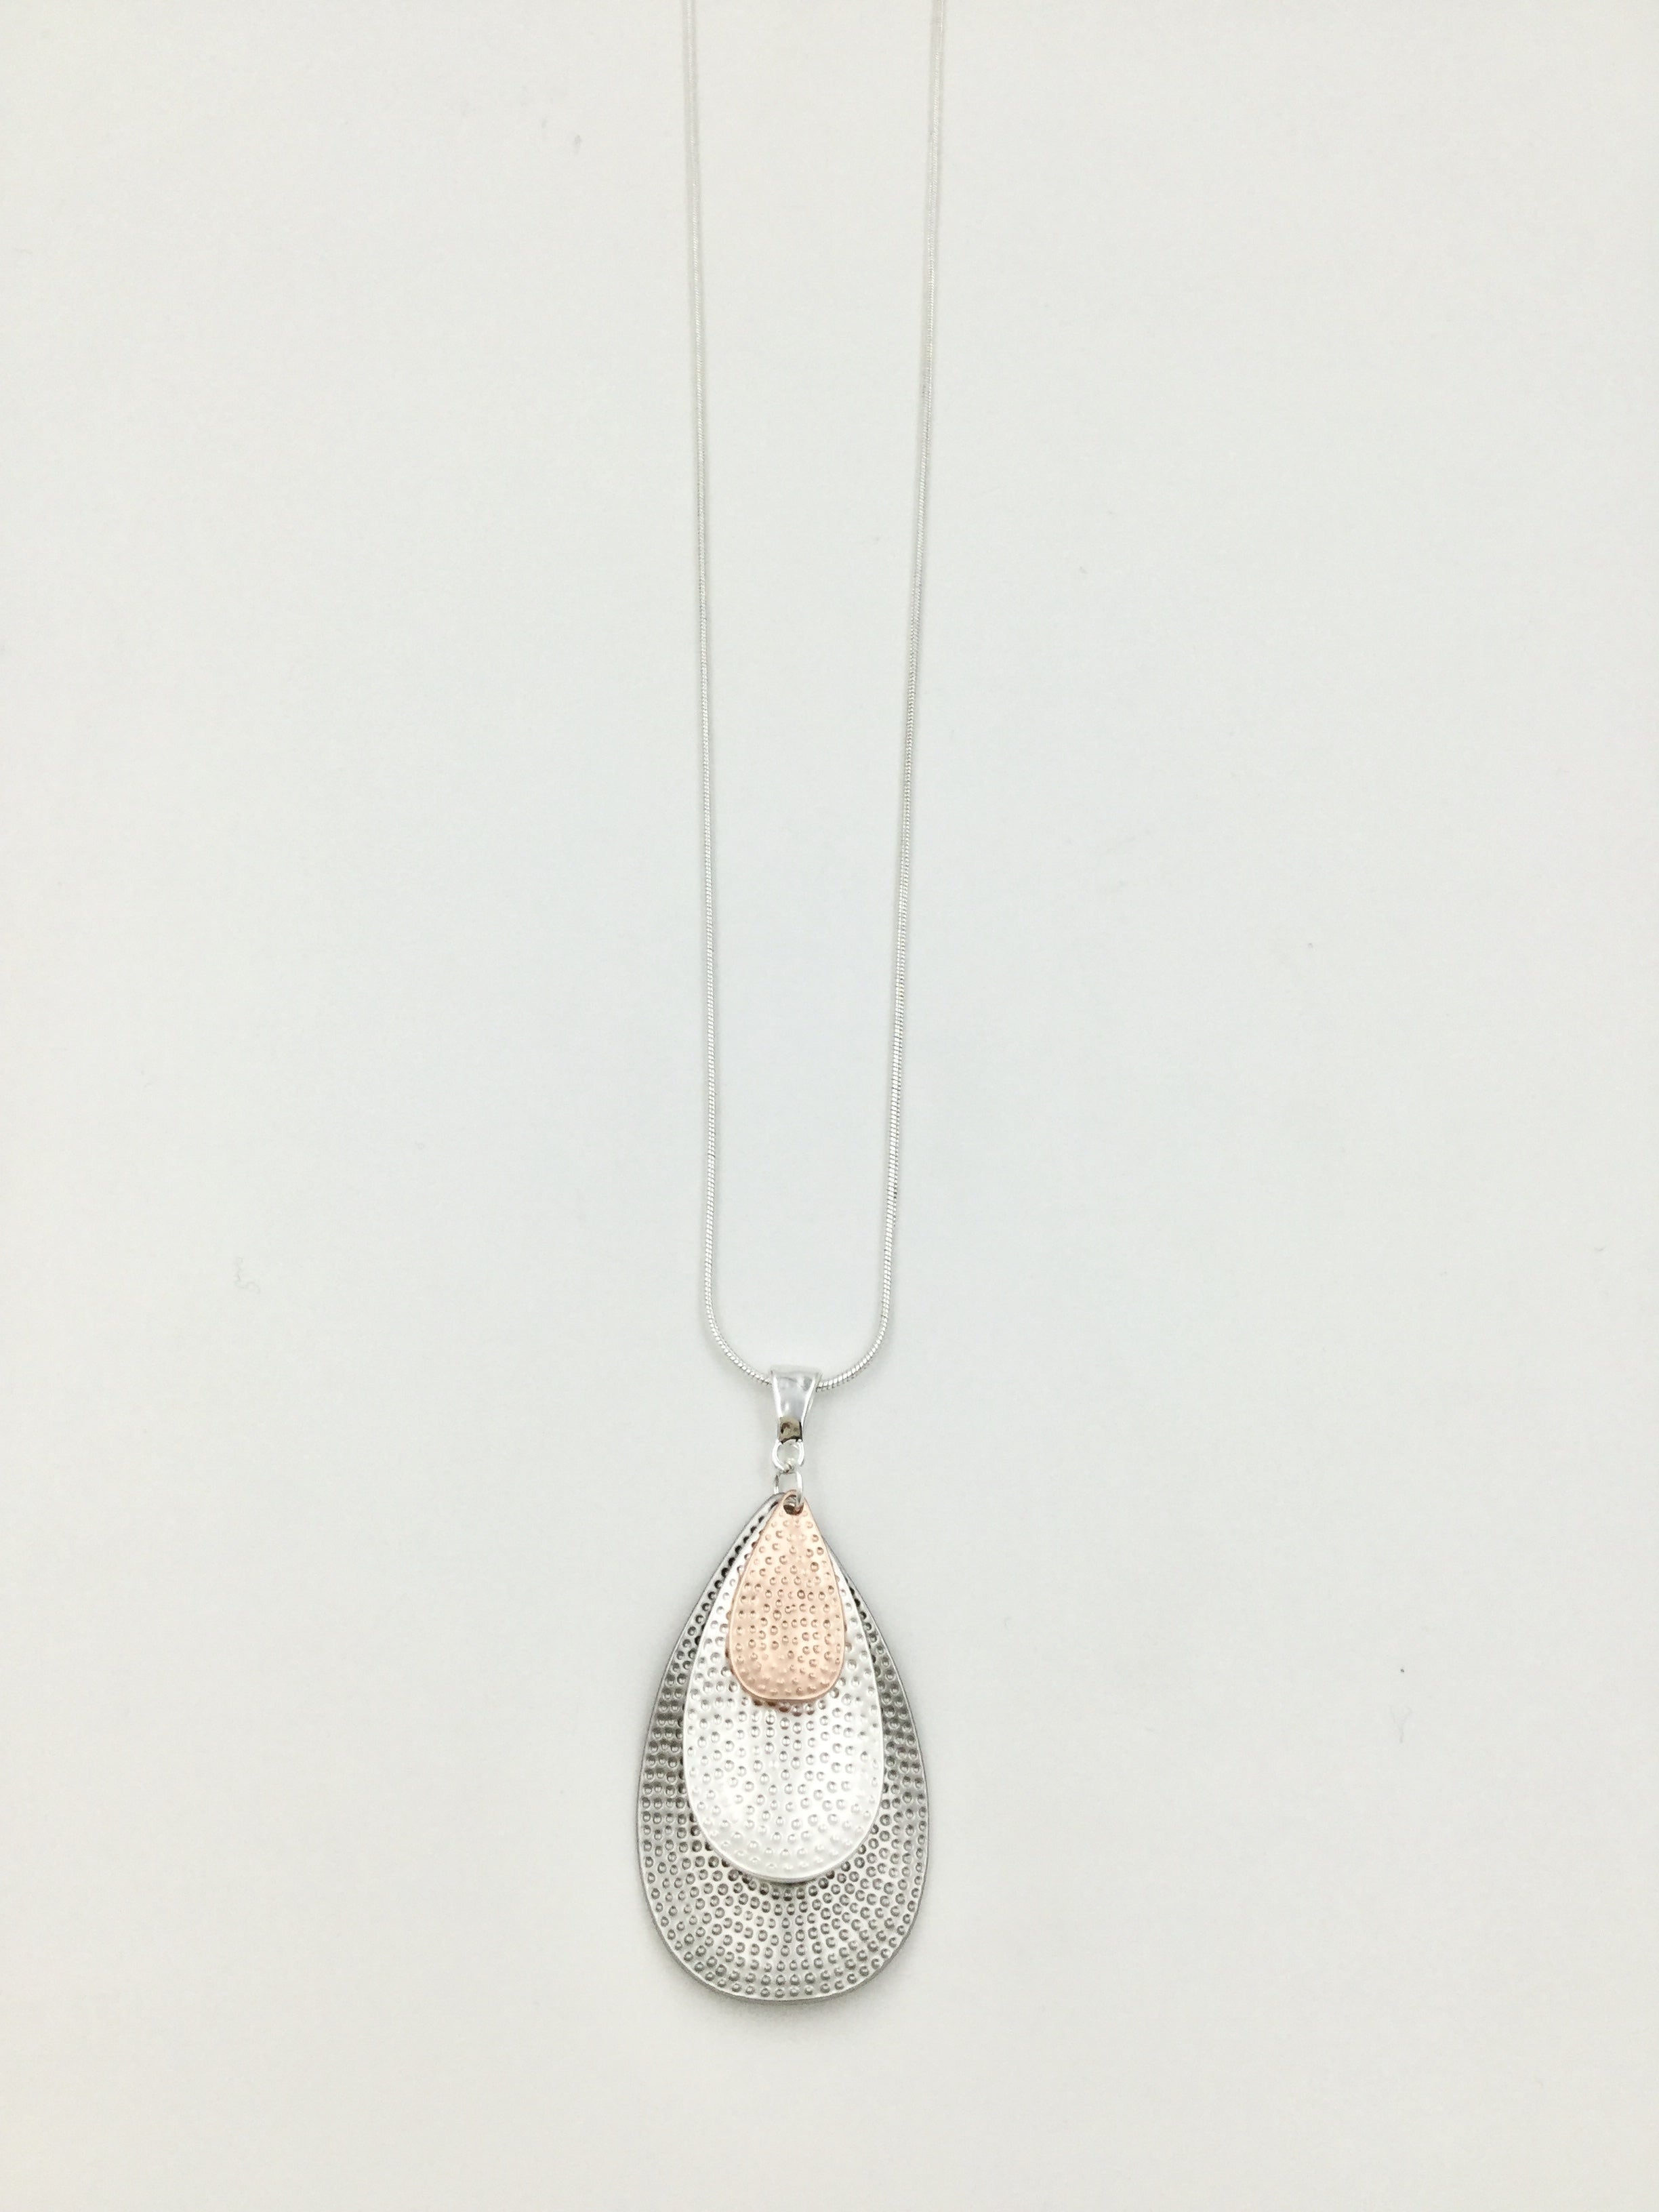 Long necklace with Layered Mix Colour Teardrop Shape Pendant